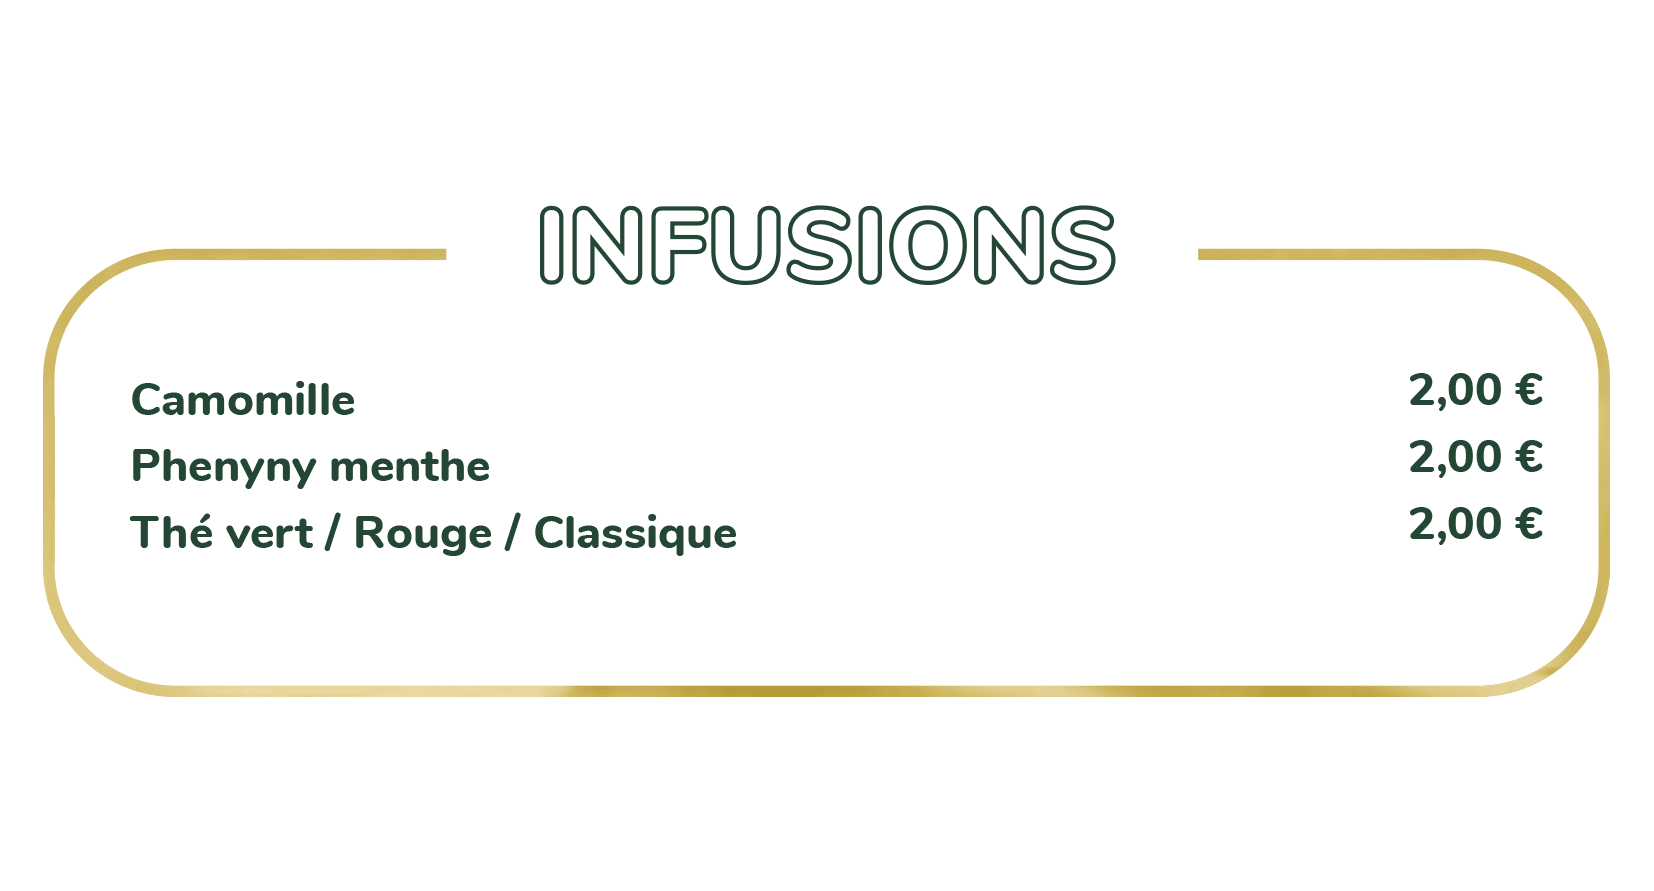 INFUSIONS